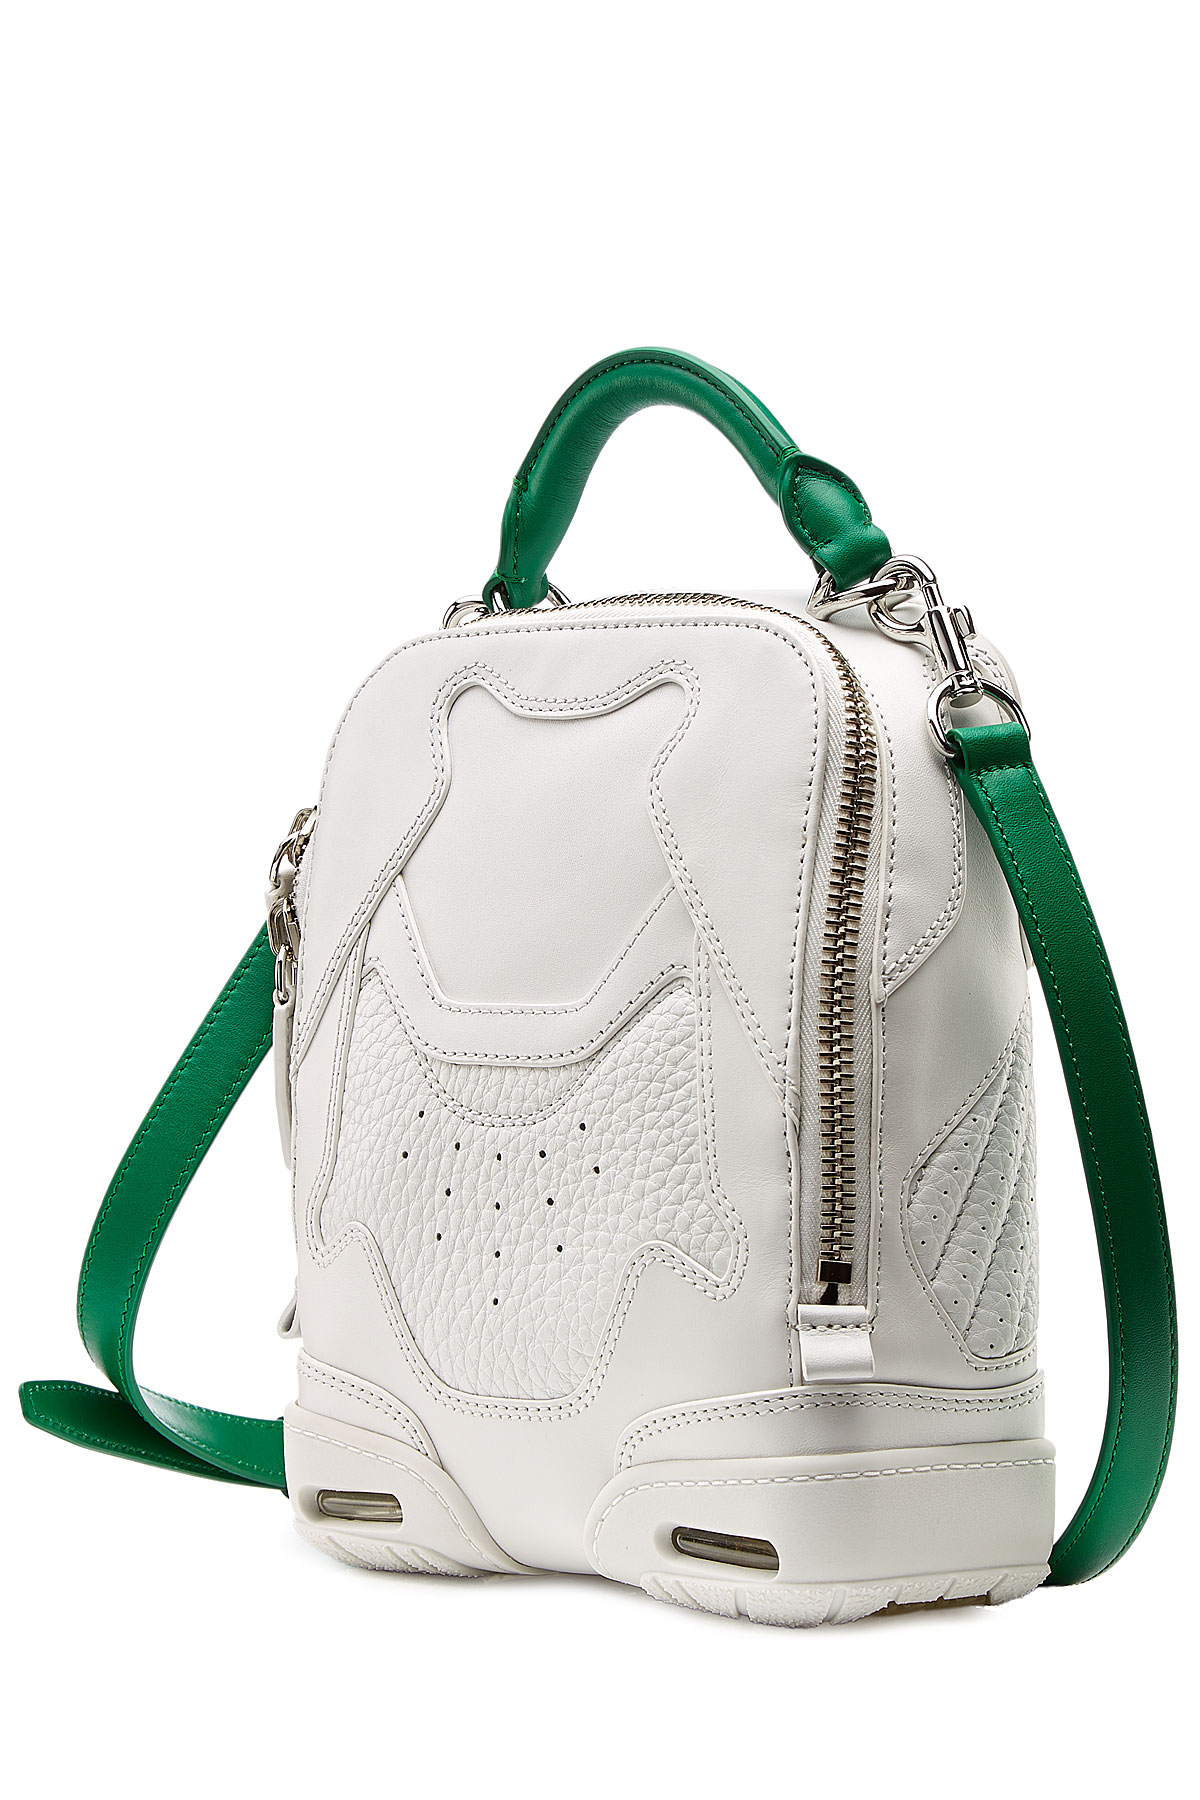 Alexander wang Small Sneakers Leather Shoulder Bag in White | Lyst